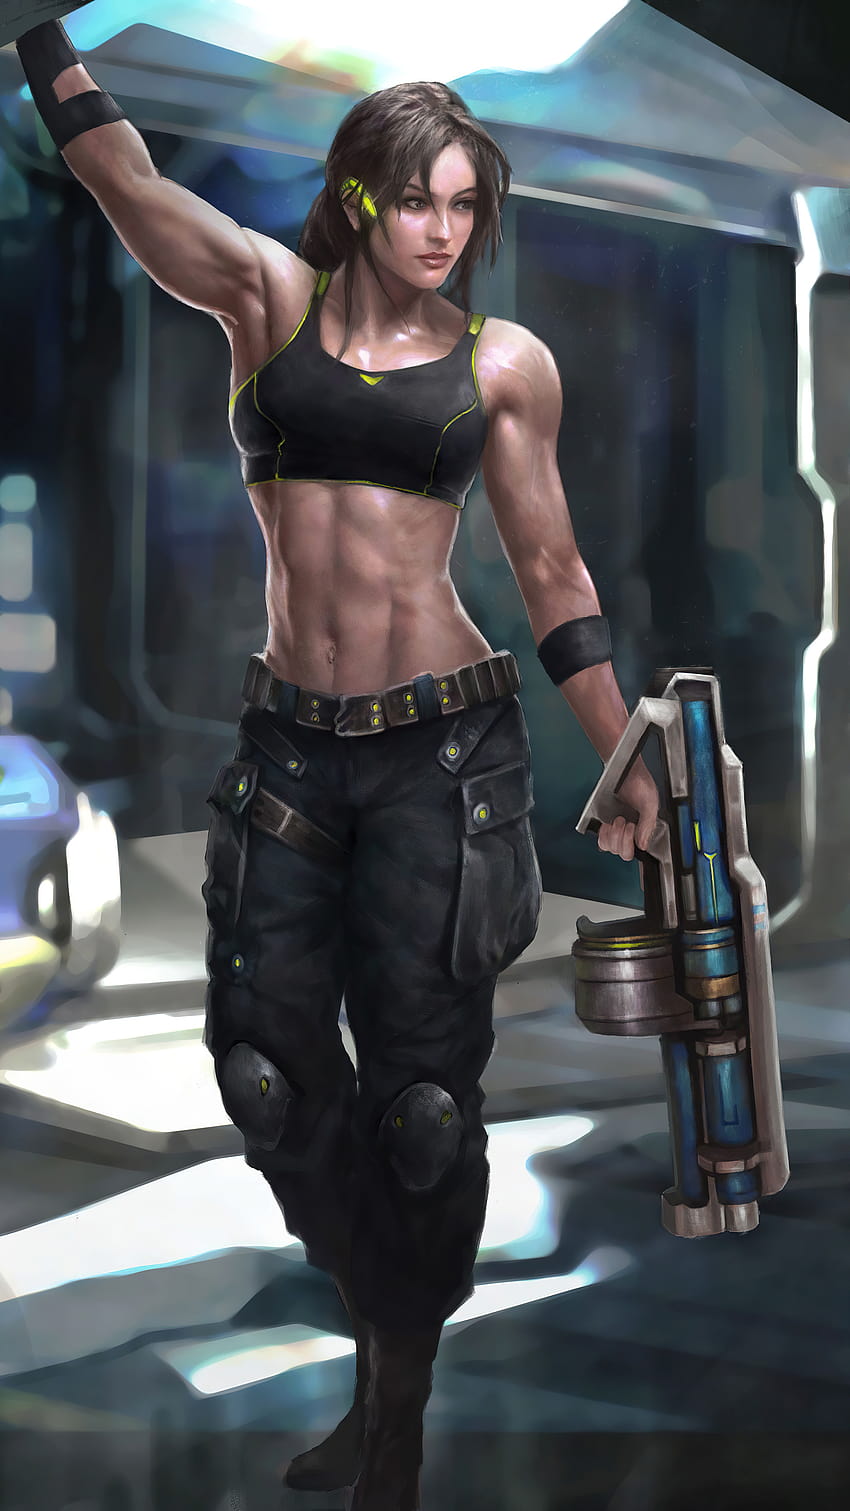 2160x3840 Muscular Girl Sony Xperia X,XZ,Z5 Premium , Backgrounds, and, muscle woman HD phone wallpaper